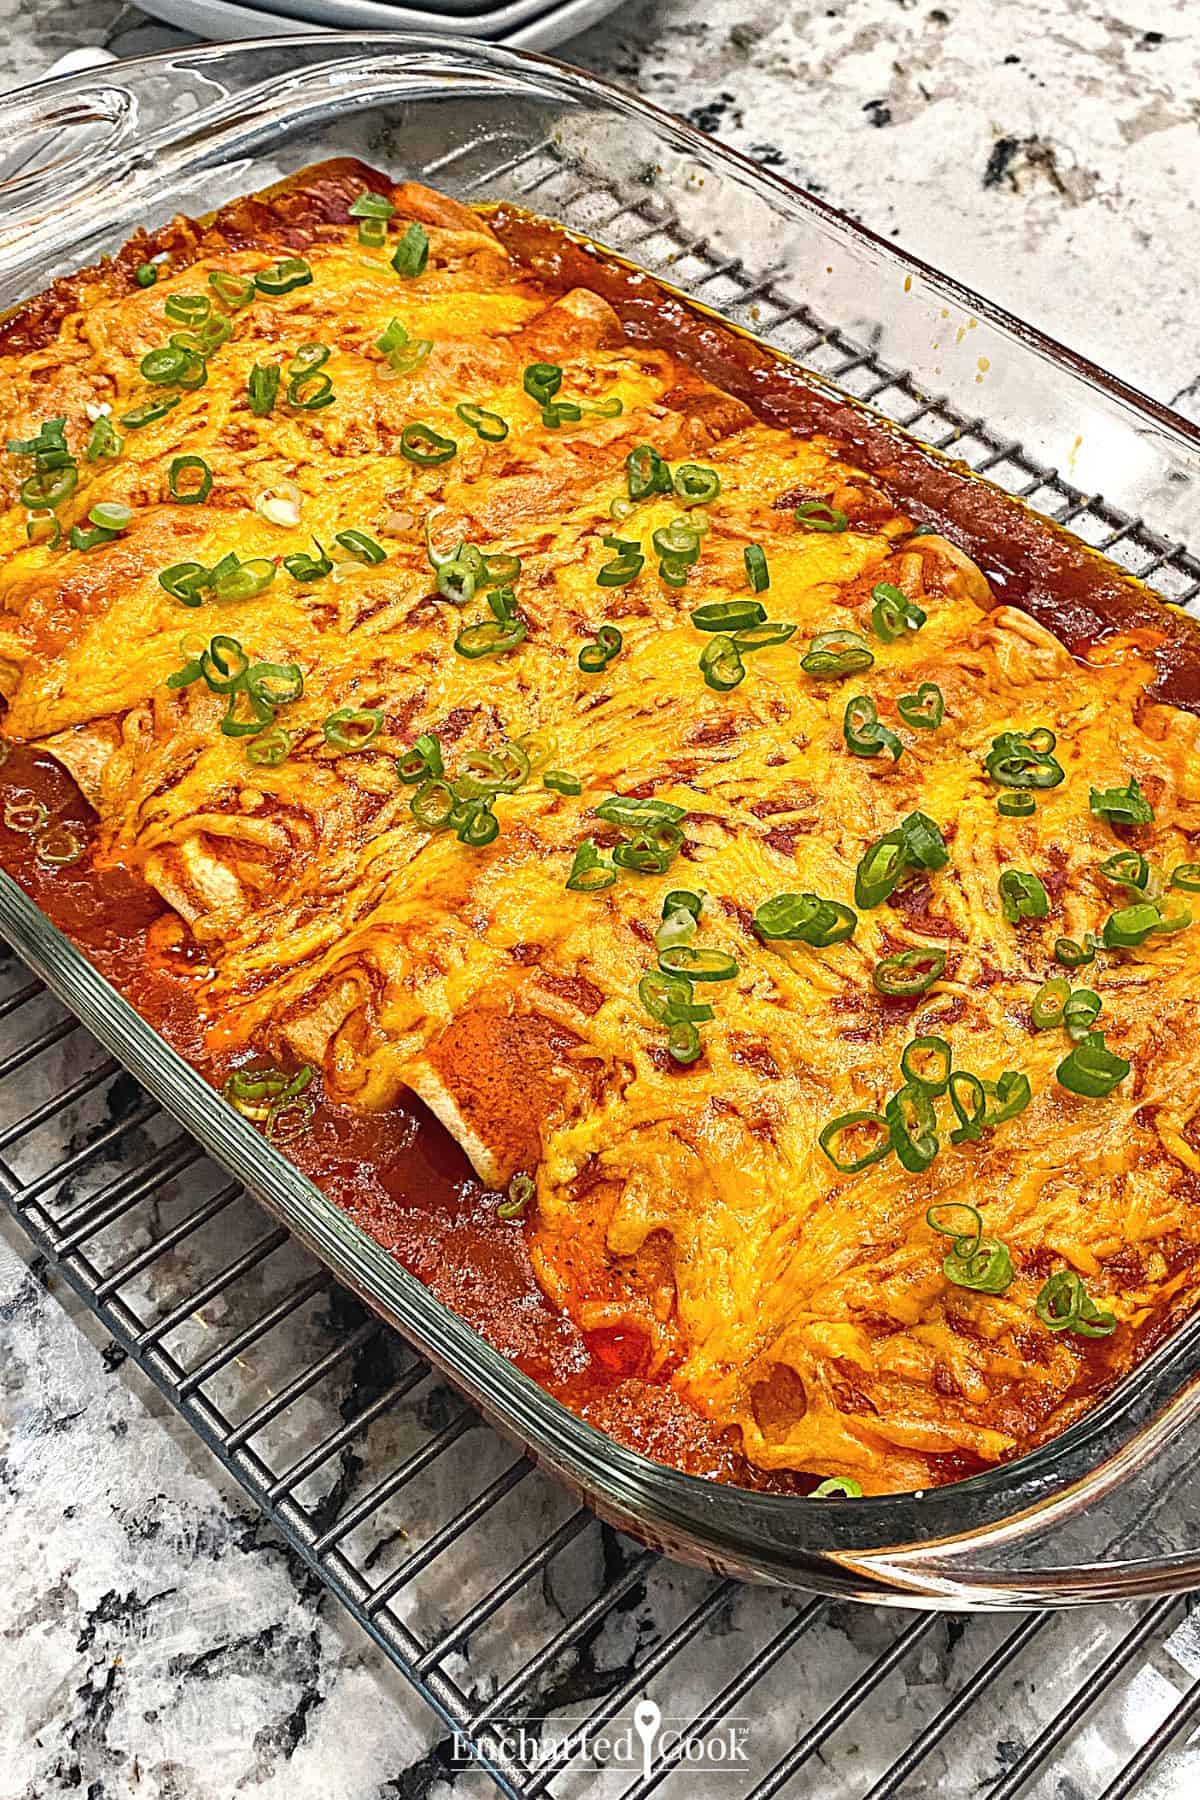 Baked enchiladas covered in red sauce and smothered with cheese in a glass baking dish.